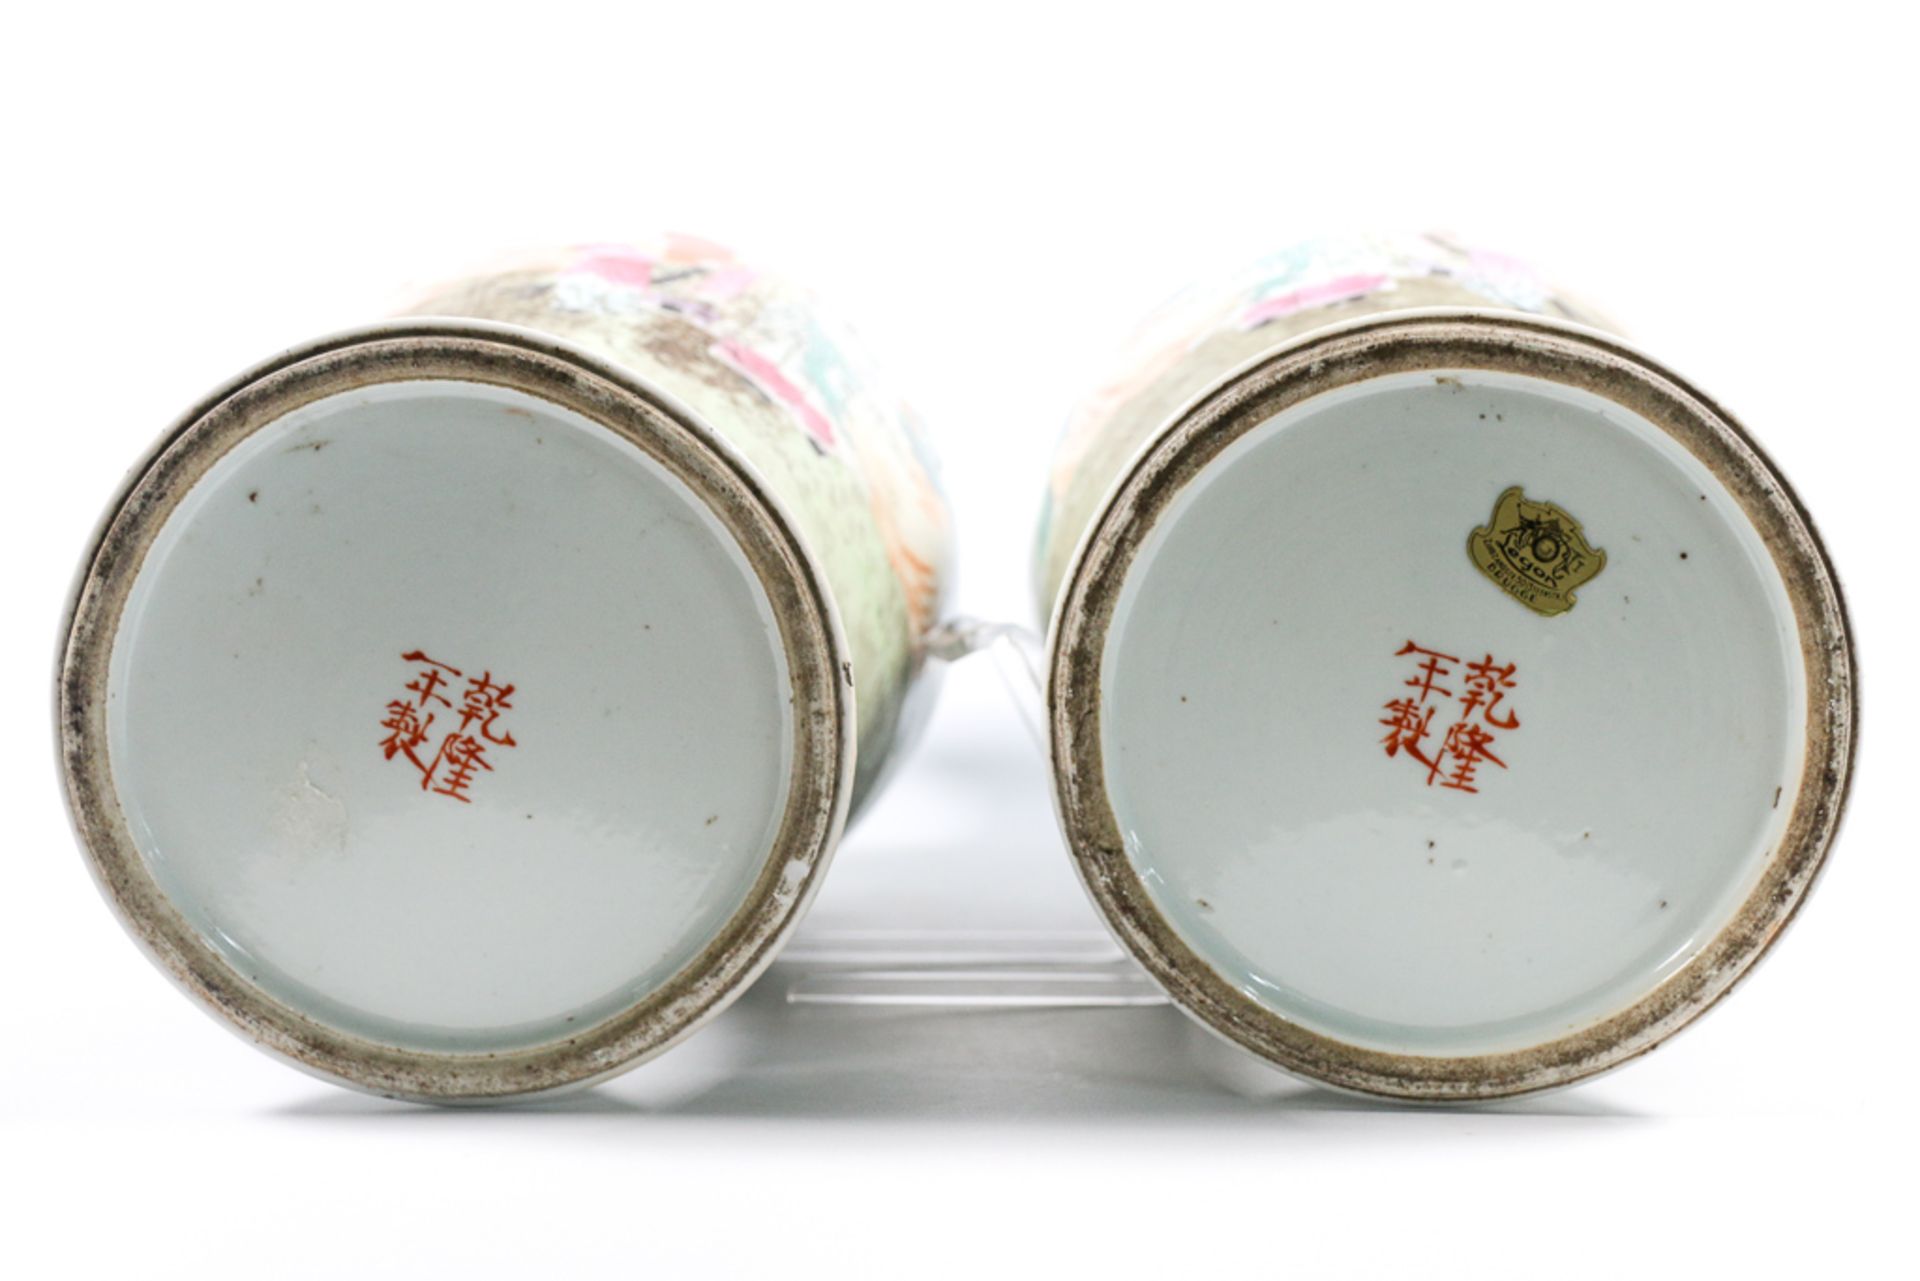 Pair of chinese vases - Image 10 of 10